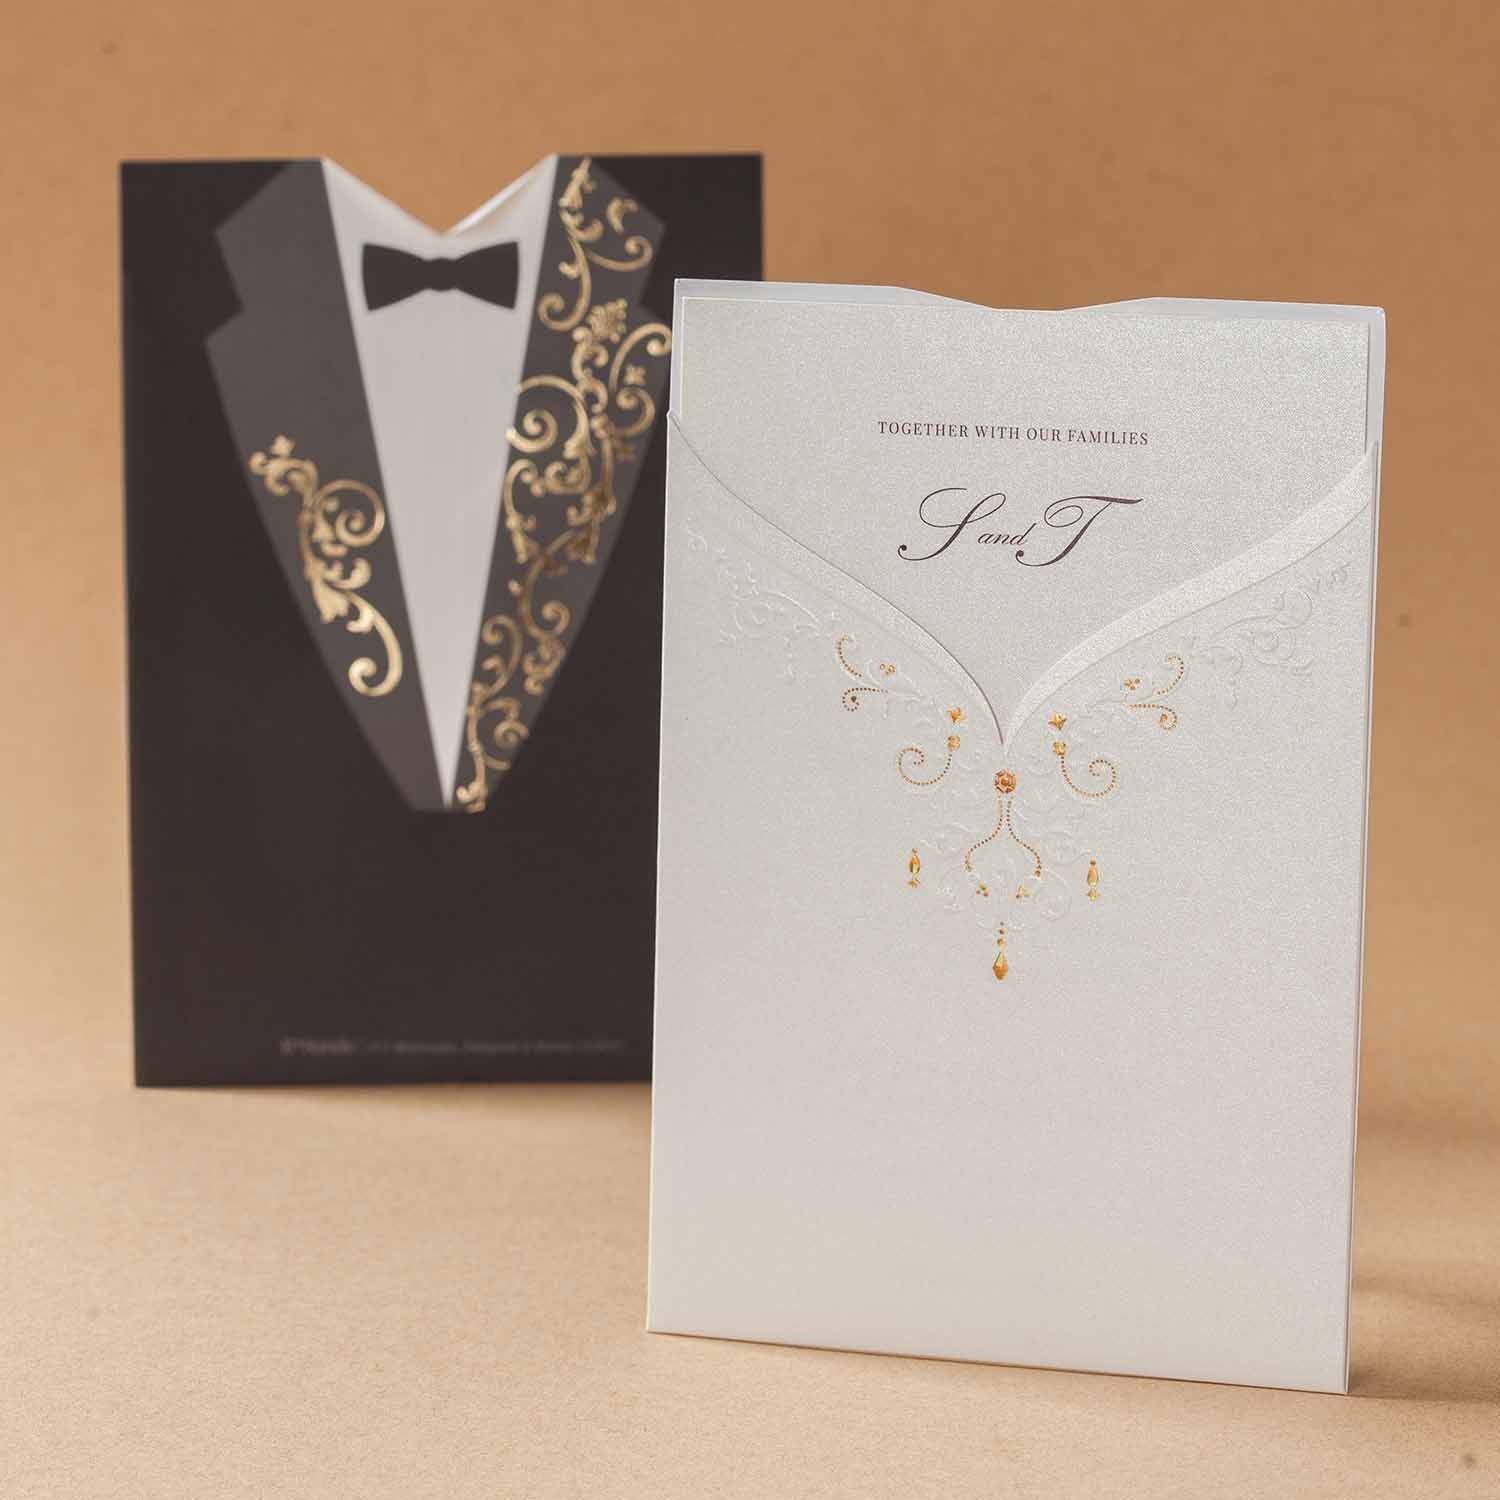 Wedding invitation, front has a wedding dress and tuxedo design on the back